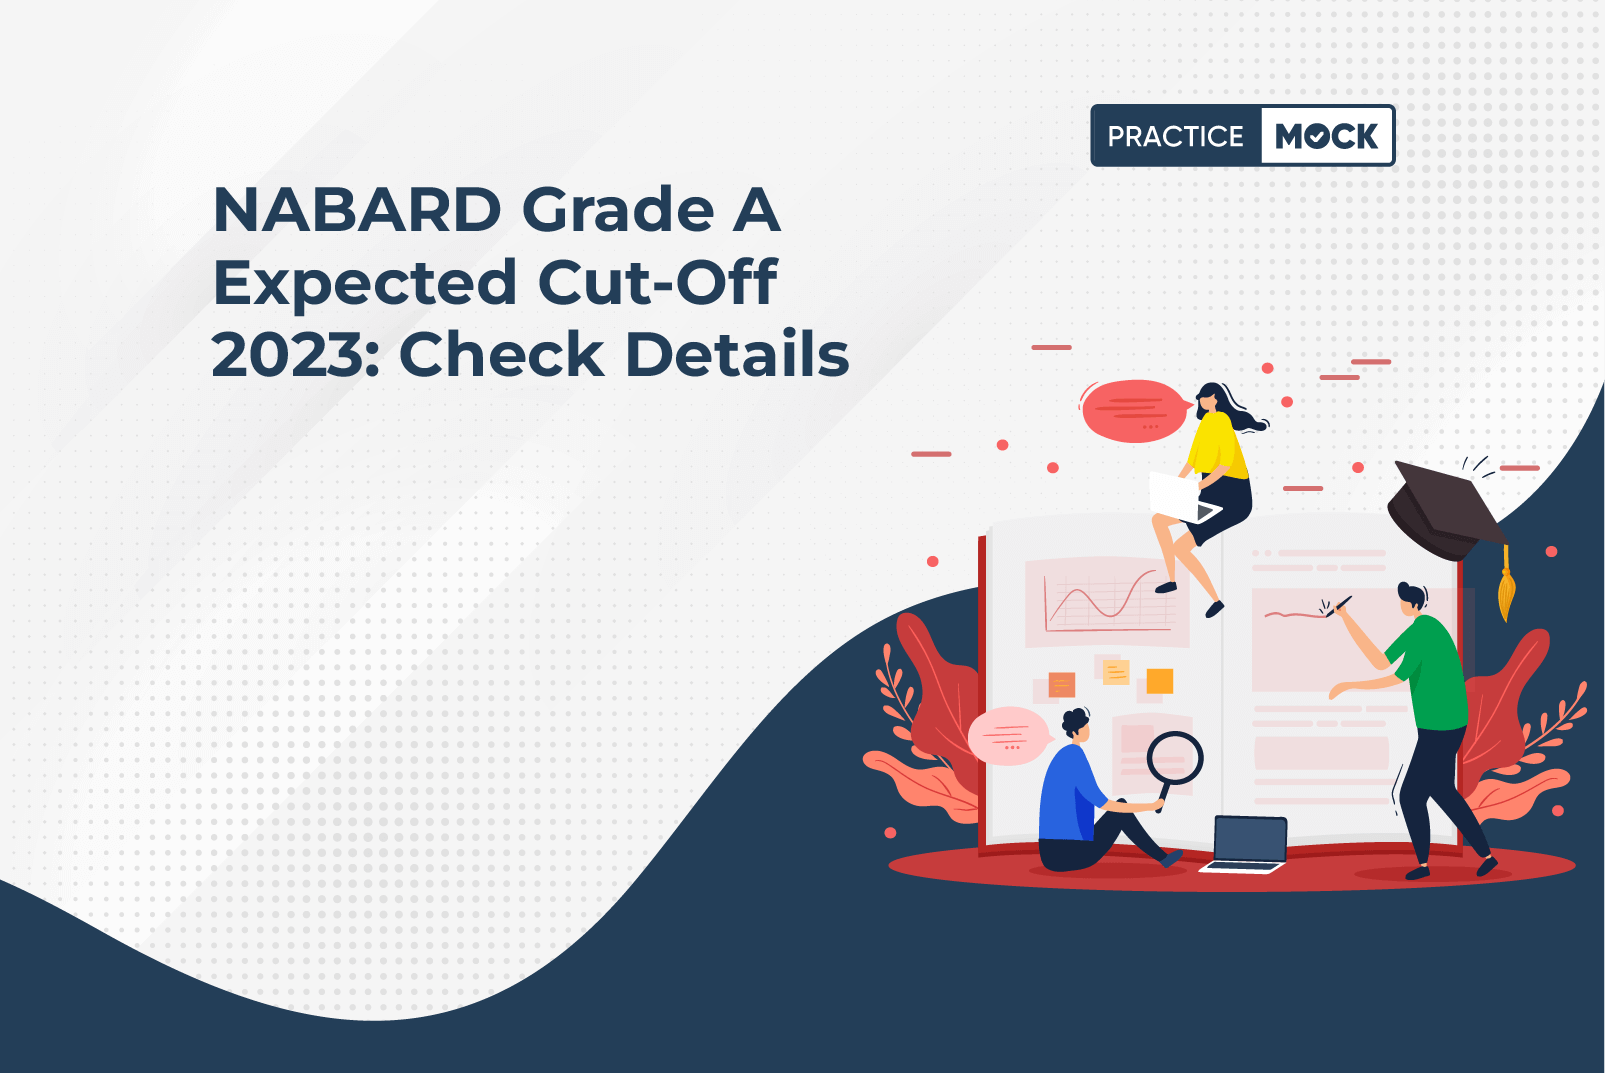 NABARD Grade A Expected Cut-Off 2023 Check Details